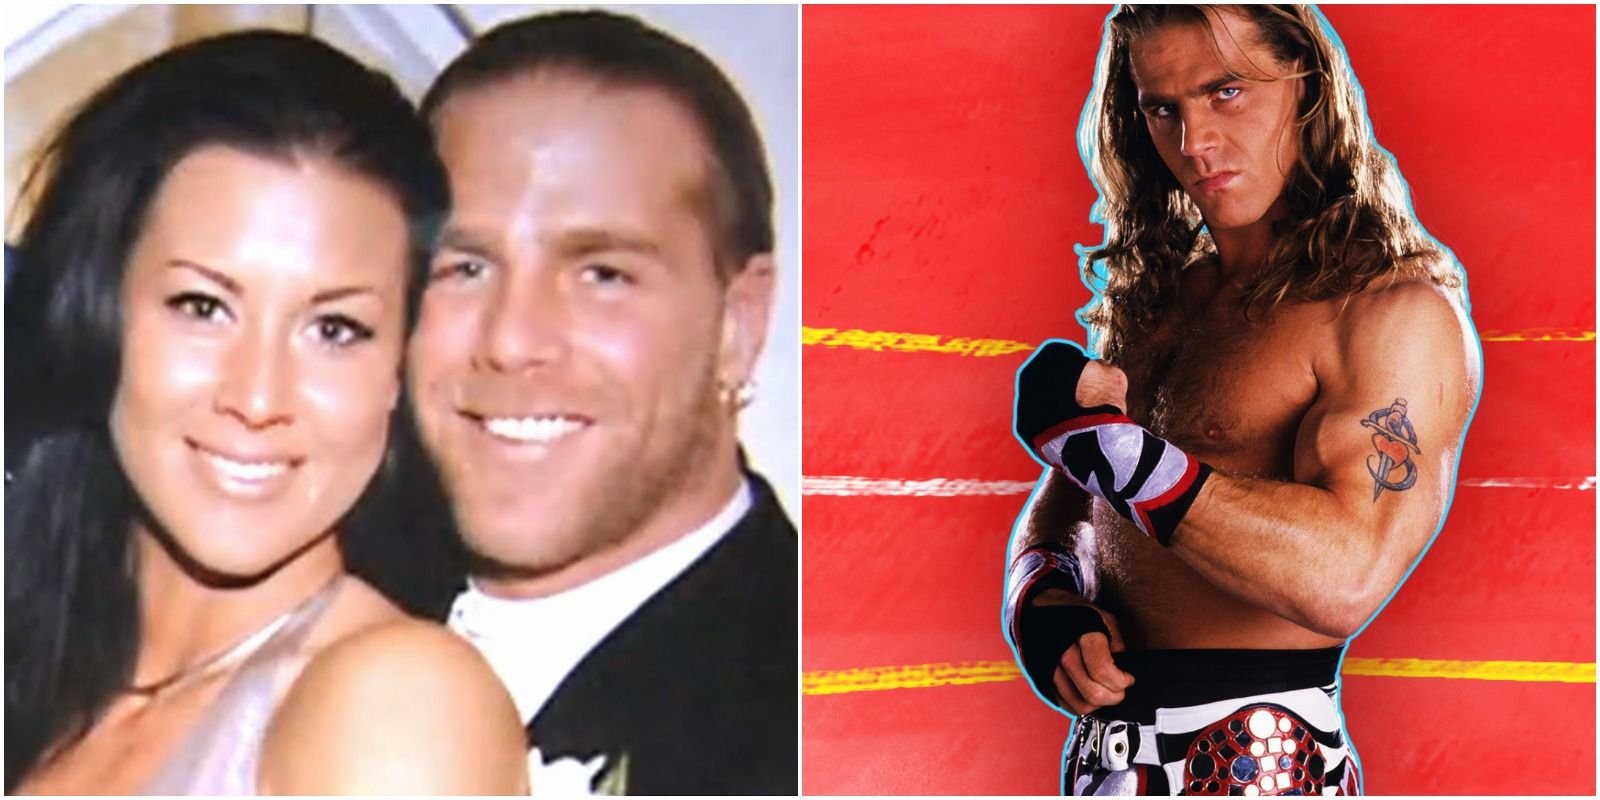 10 Facts We Learned A&E Biography: Shawn Michaels